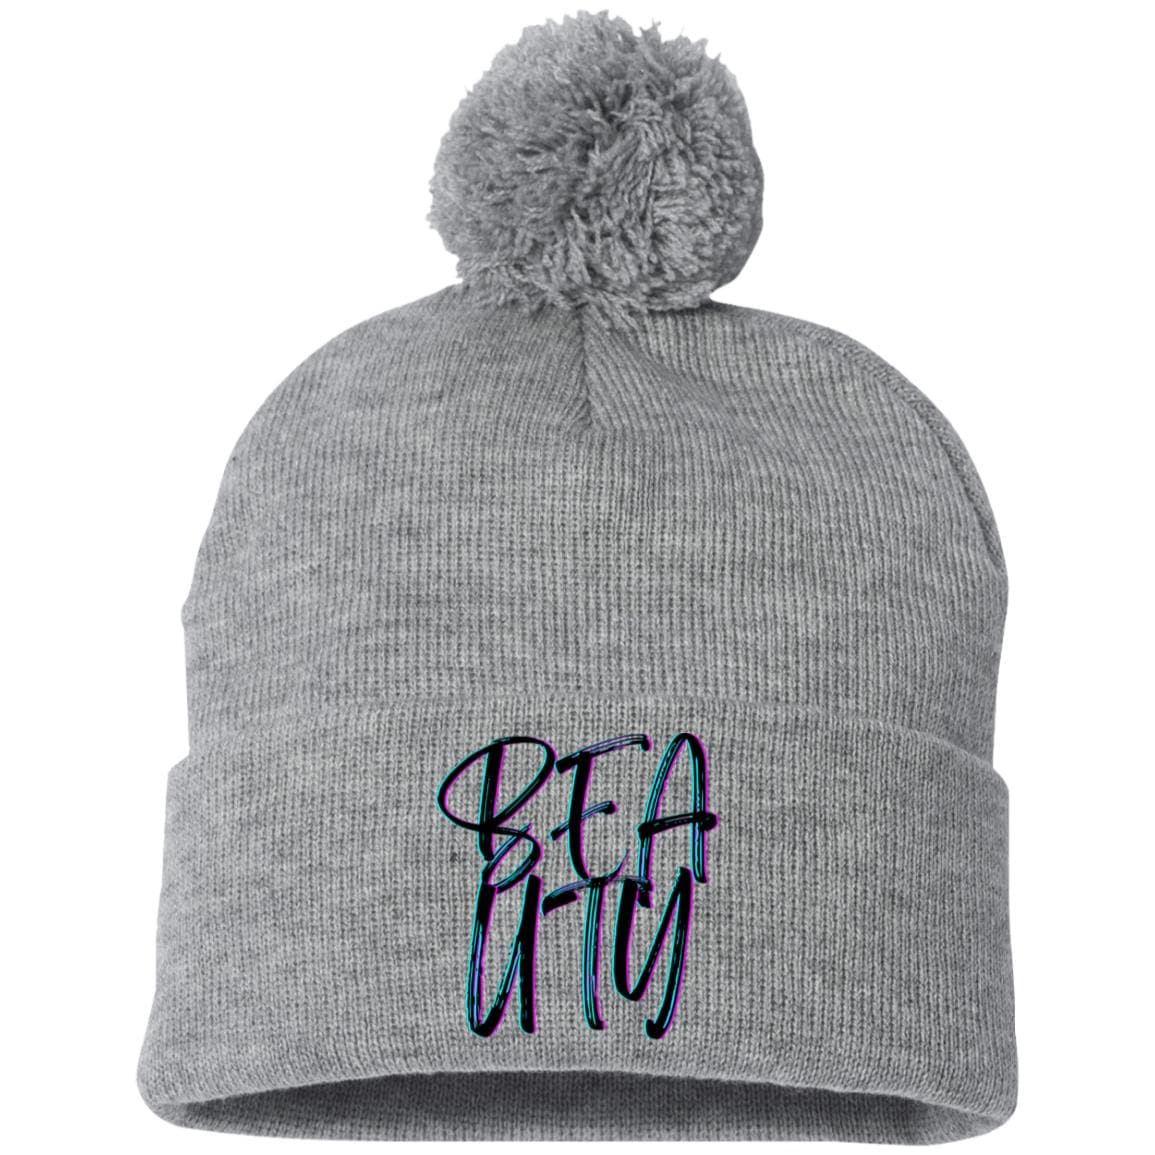 Heather Grey One Size - Beauty Embroidered Pom Pom Knit Cap - Hats at TFC&H Co.